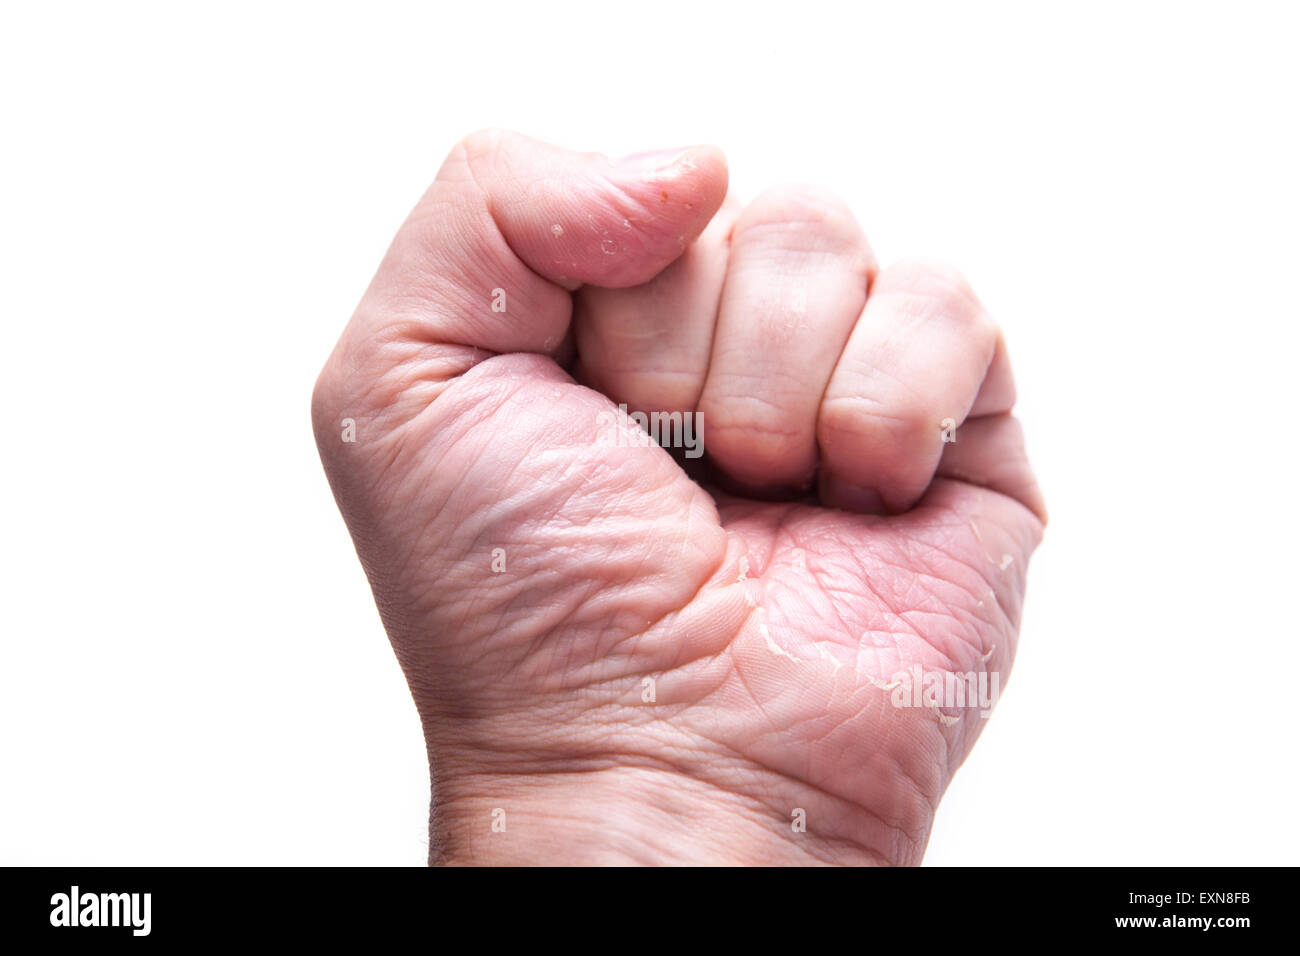 Eczema Dermatitis on Back of Hand and Fingers Stock Photo